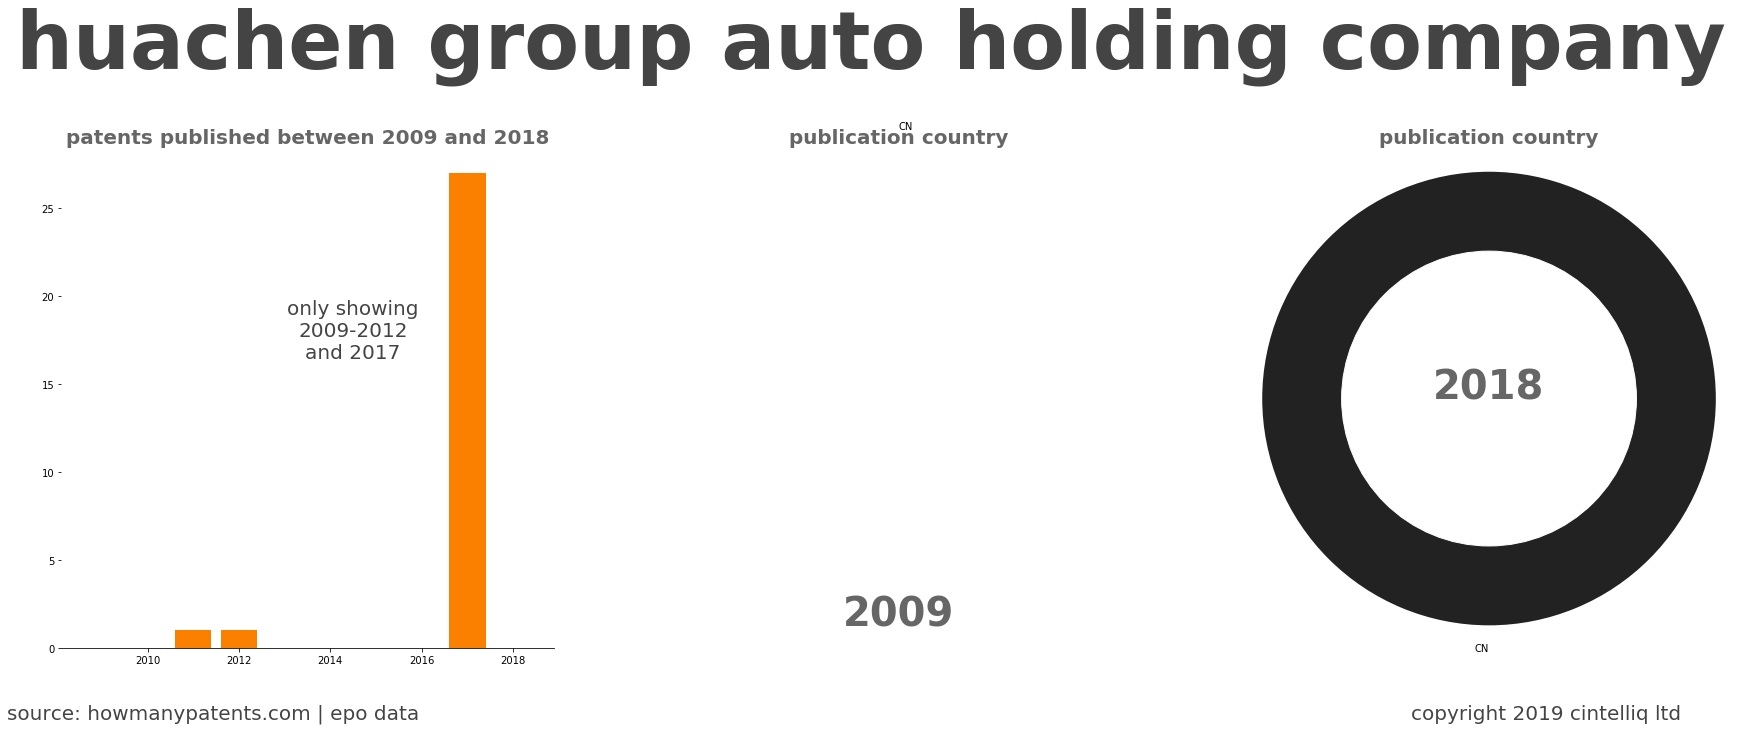 summary of patents for Huachen Group Auto Holding Company